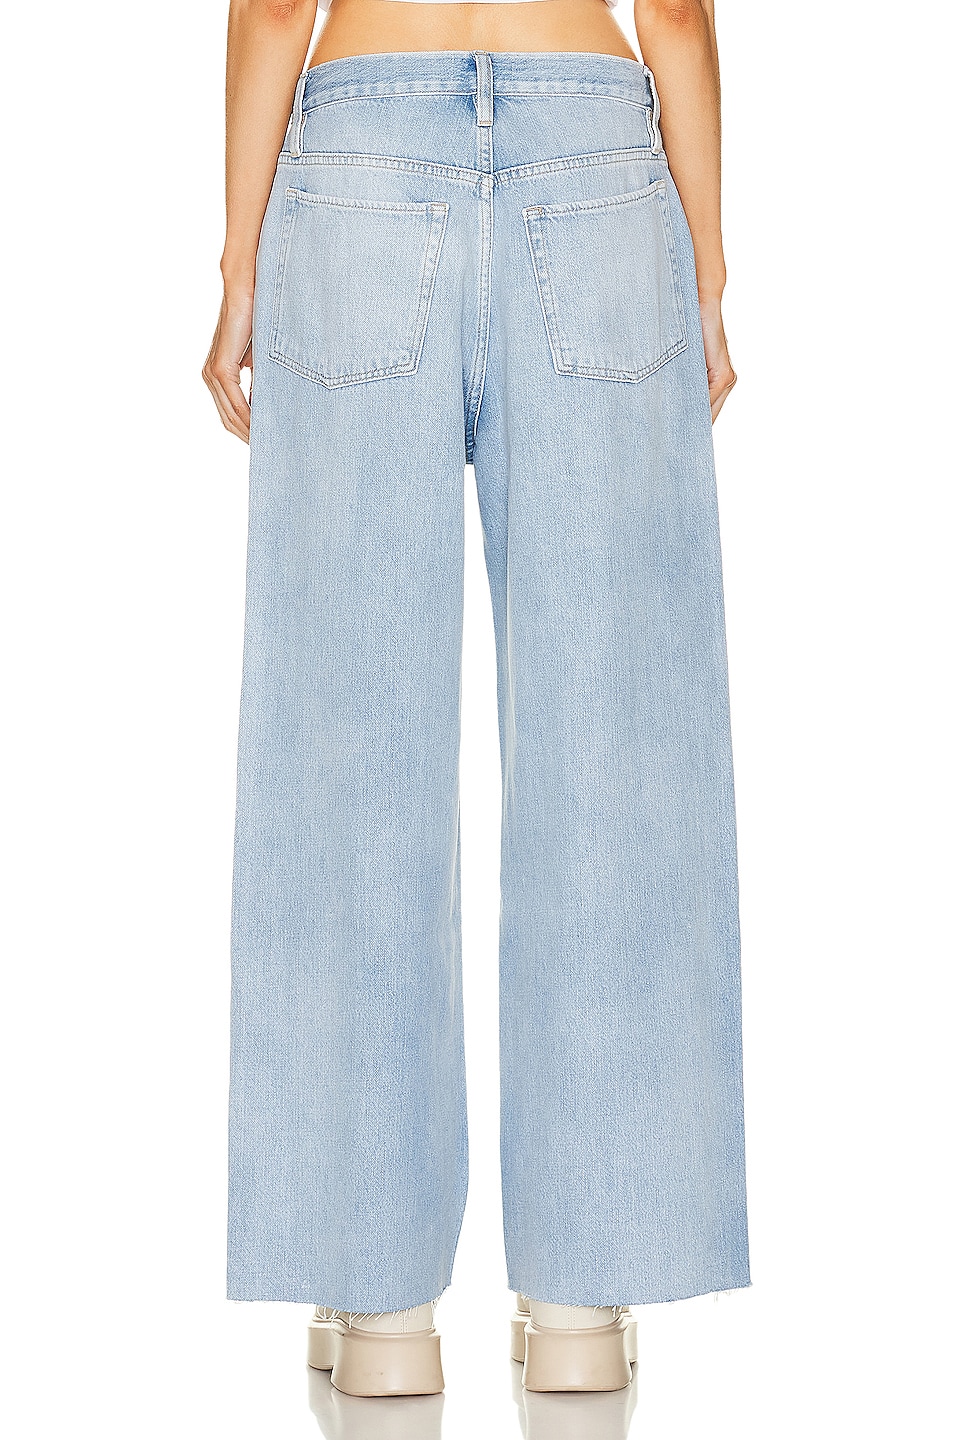 FRAME Le Low Baggy Wide Leg in Natoma Clean | FWRD